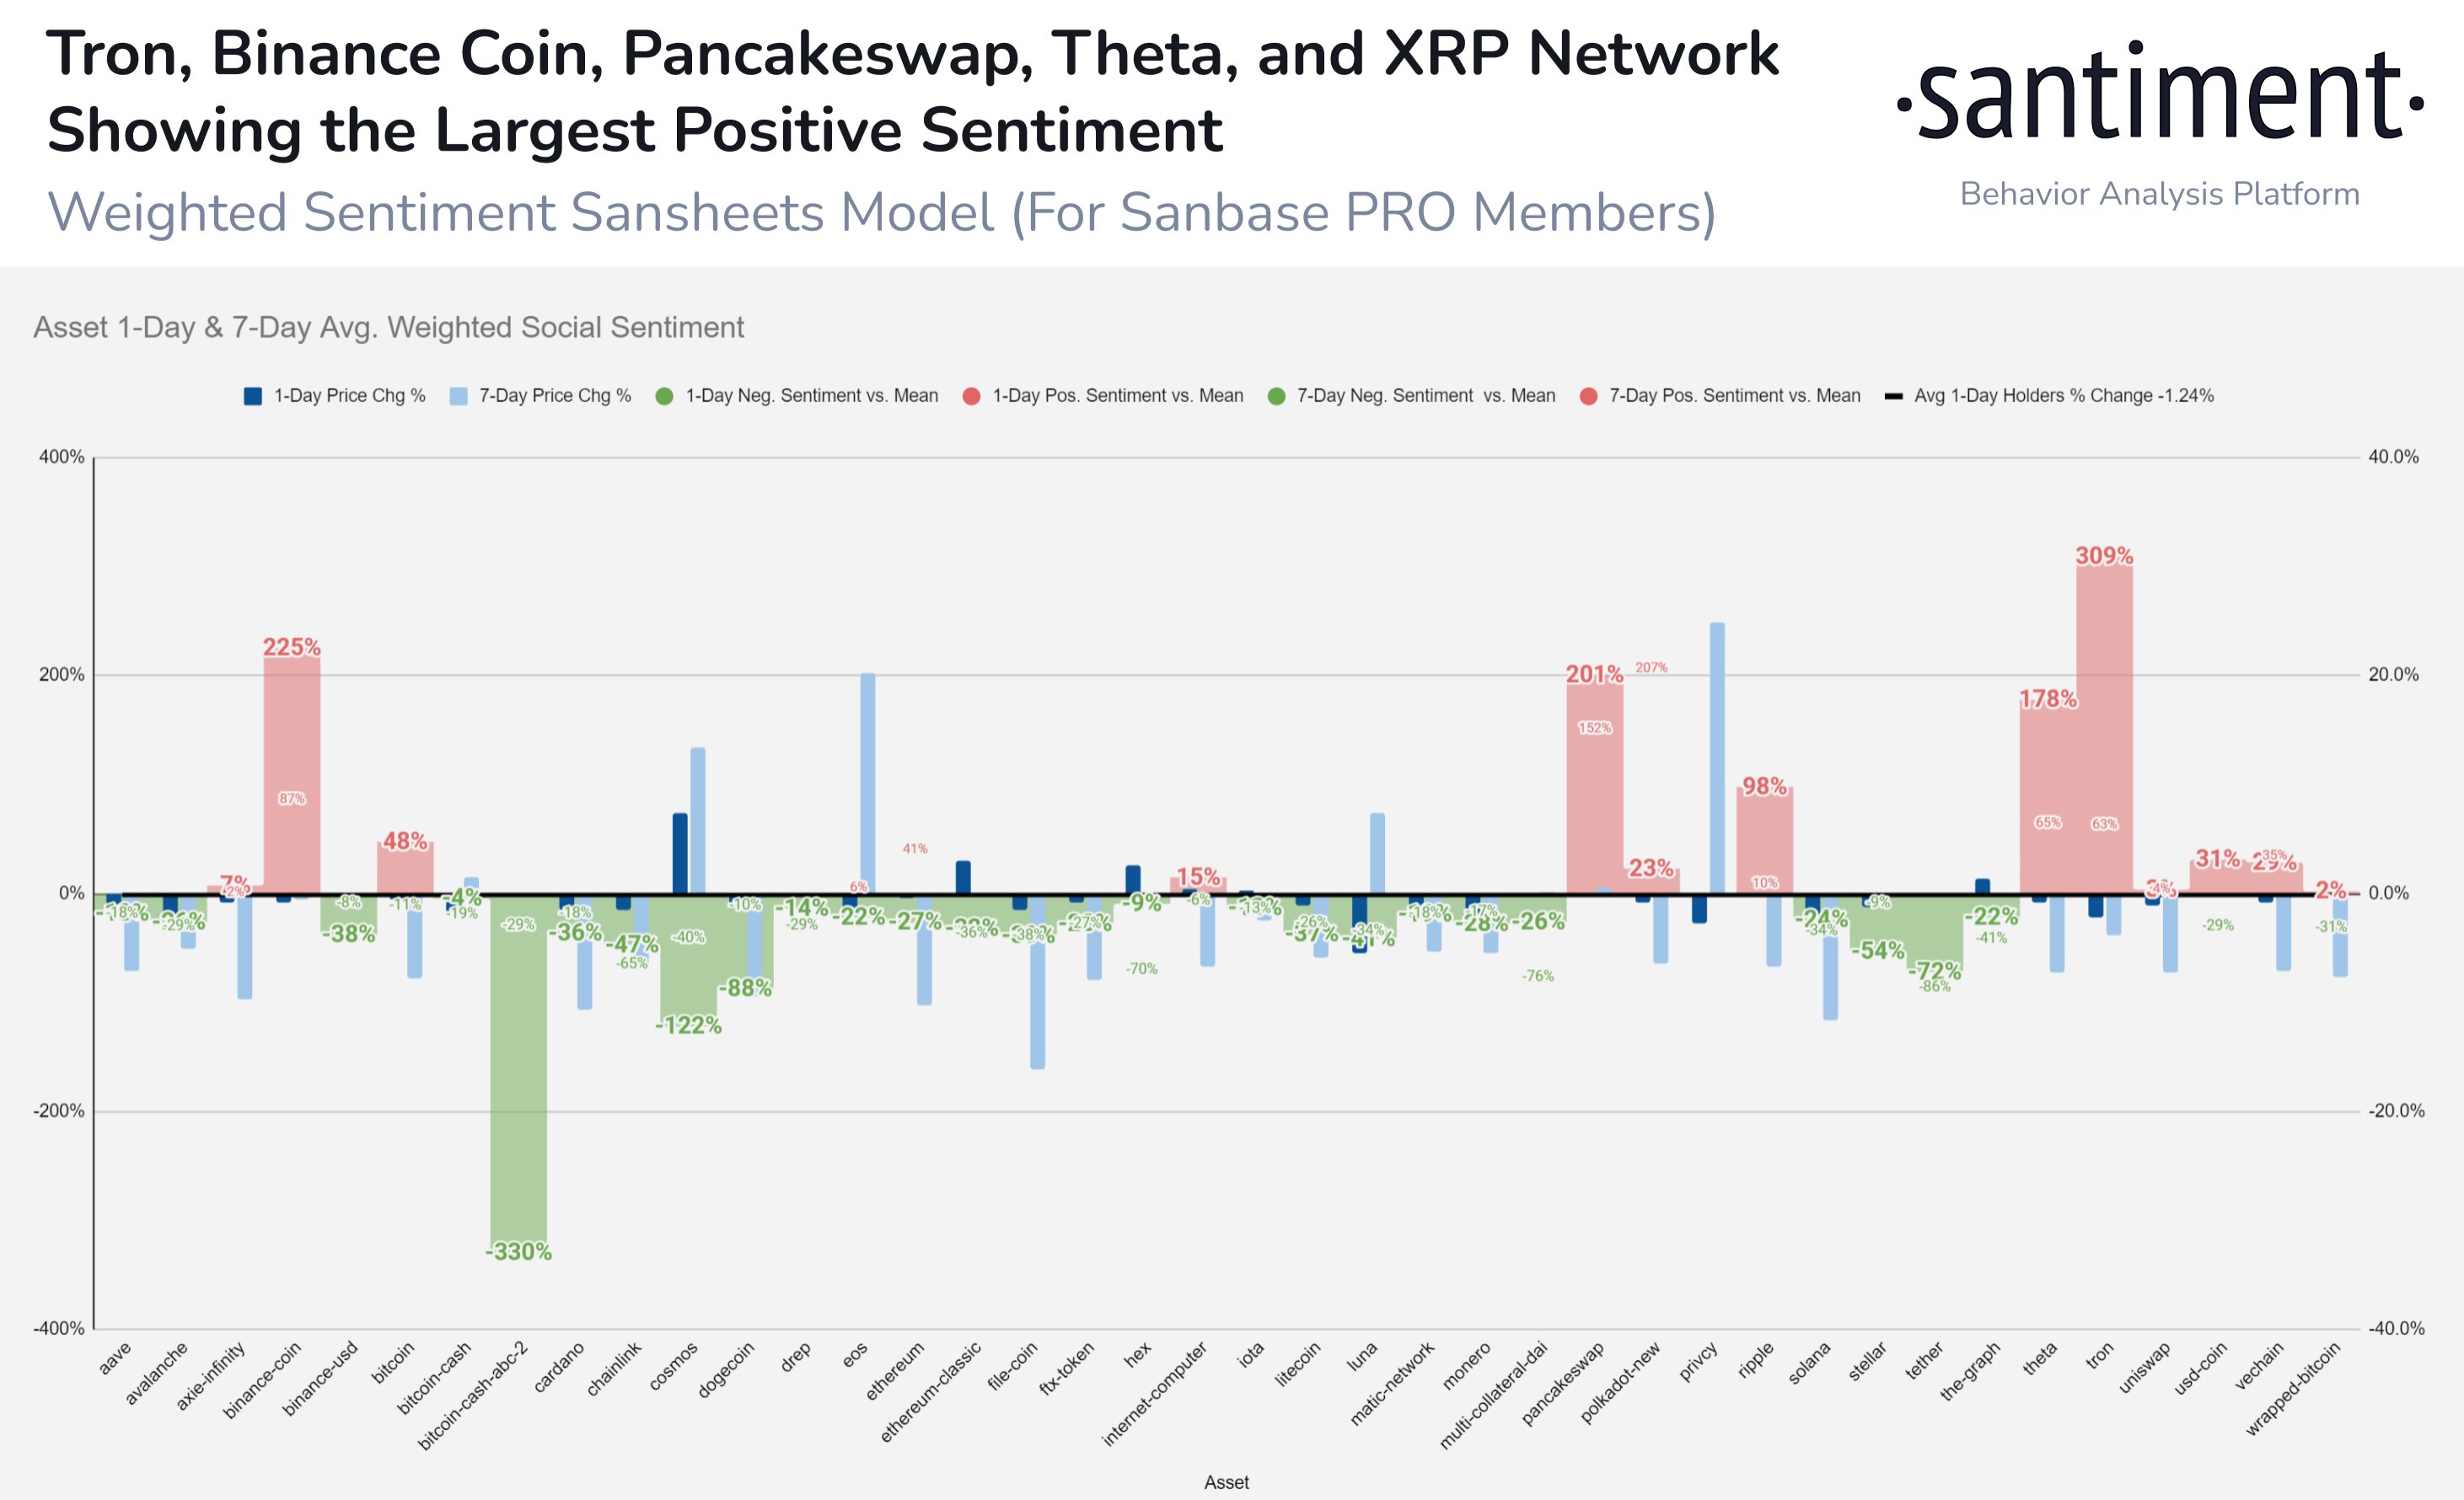 Weighted Sentiment of TRX, BNB, CAKE, THETA, XRP